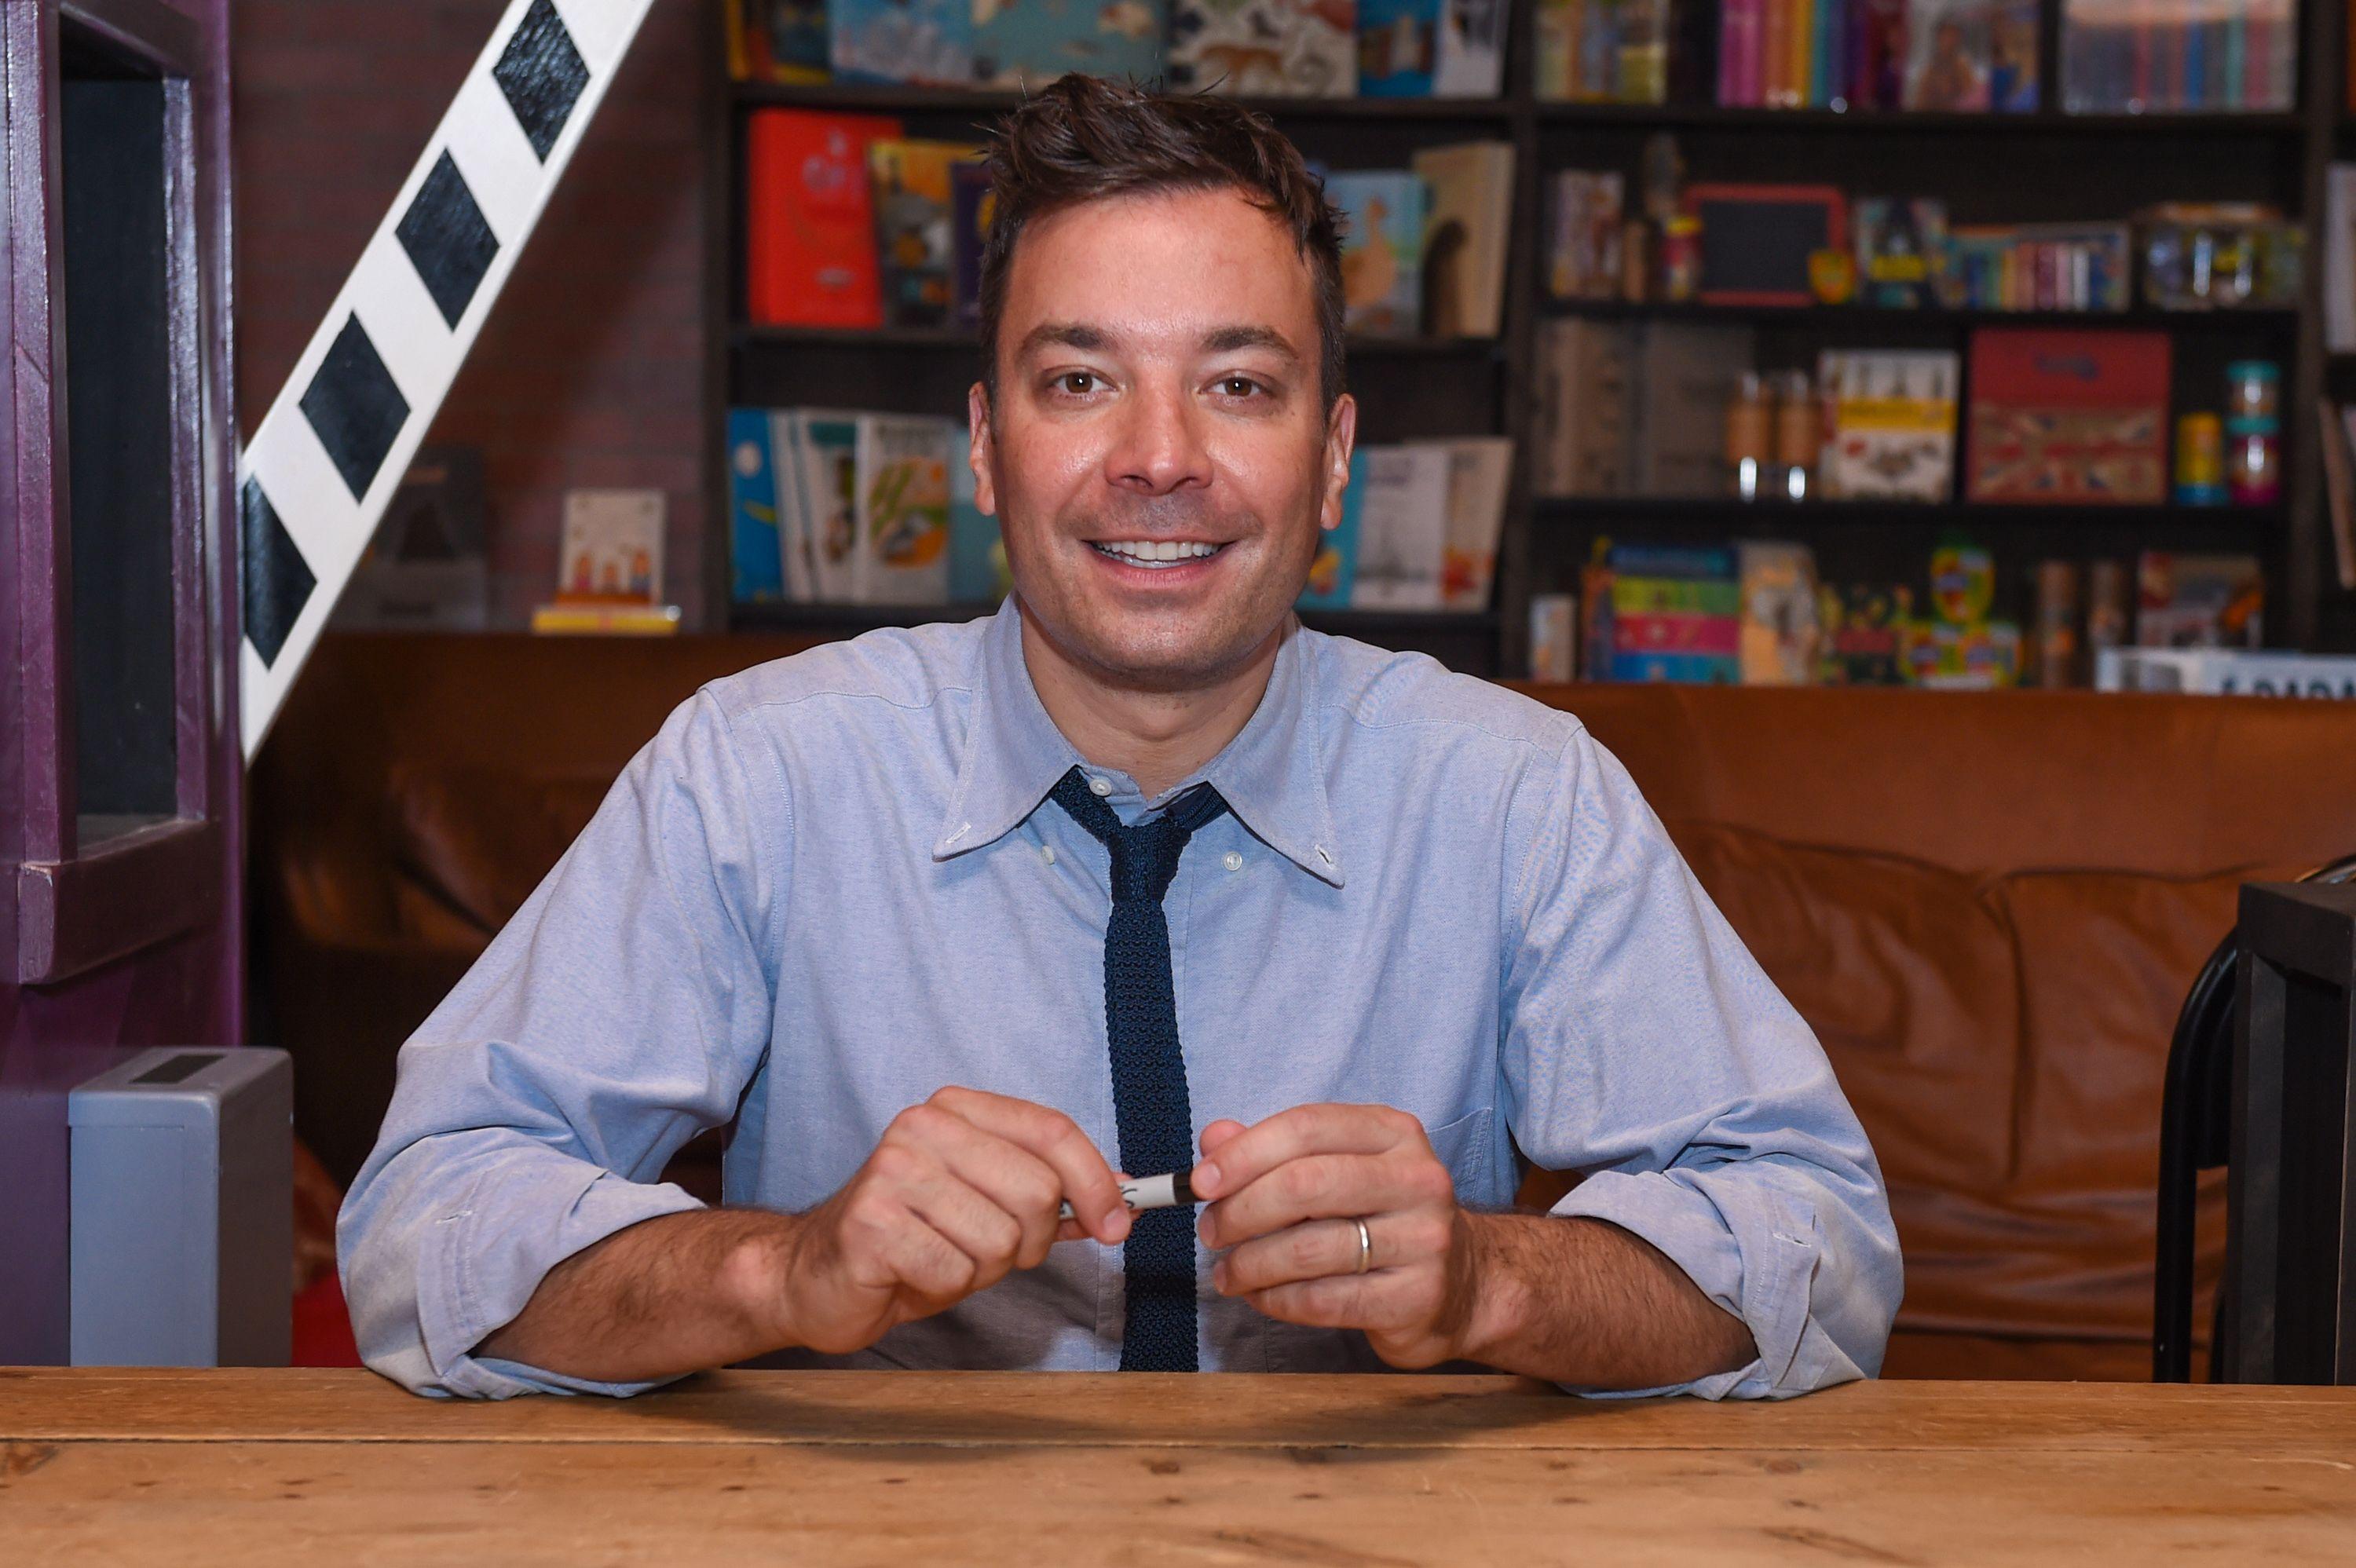 Jimmy Fallon Wallpaper Image Photo Picture Background